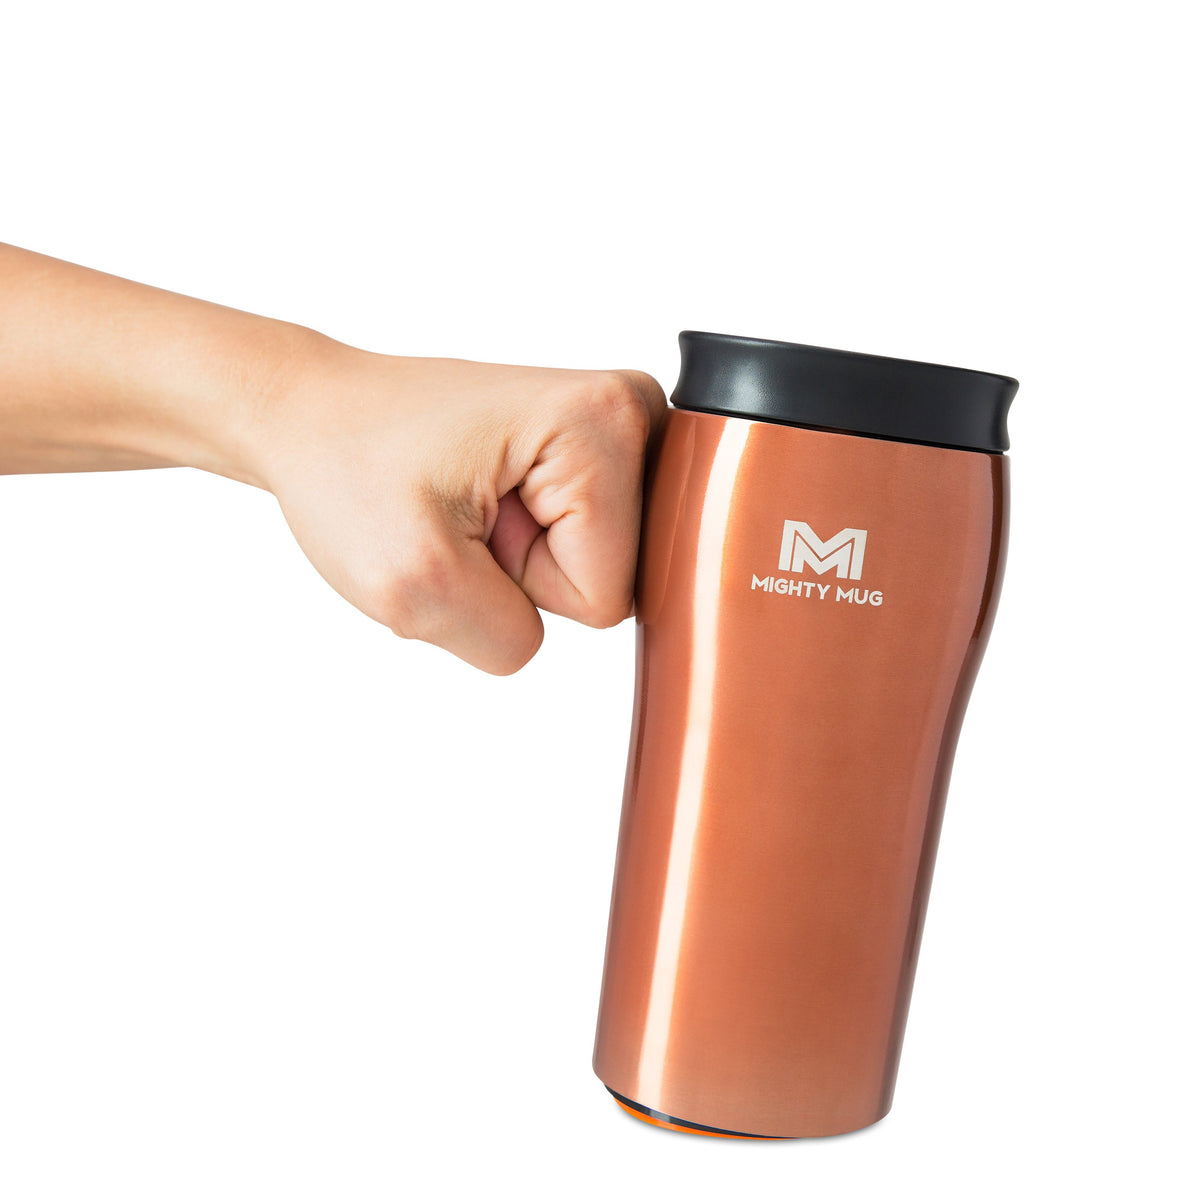 Mighty Mug Solo Travel Car Spill Proof Insulated Thermos Cup 320ml BPA Free